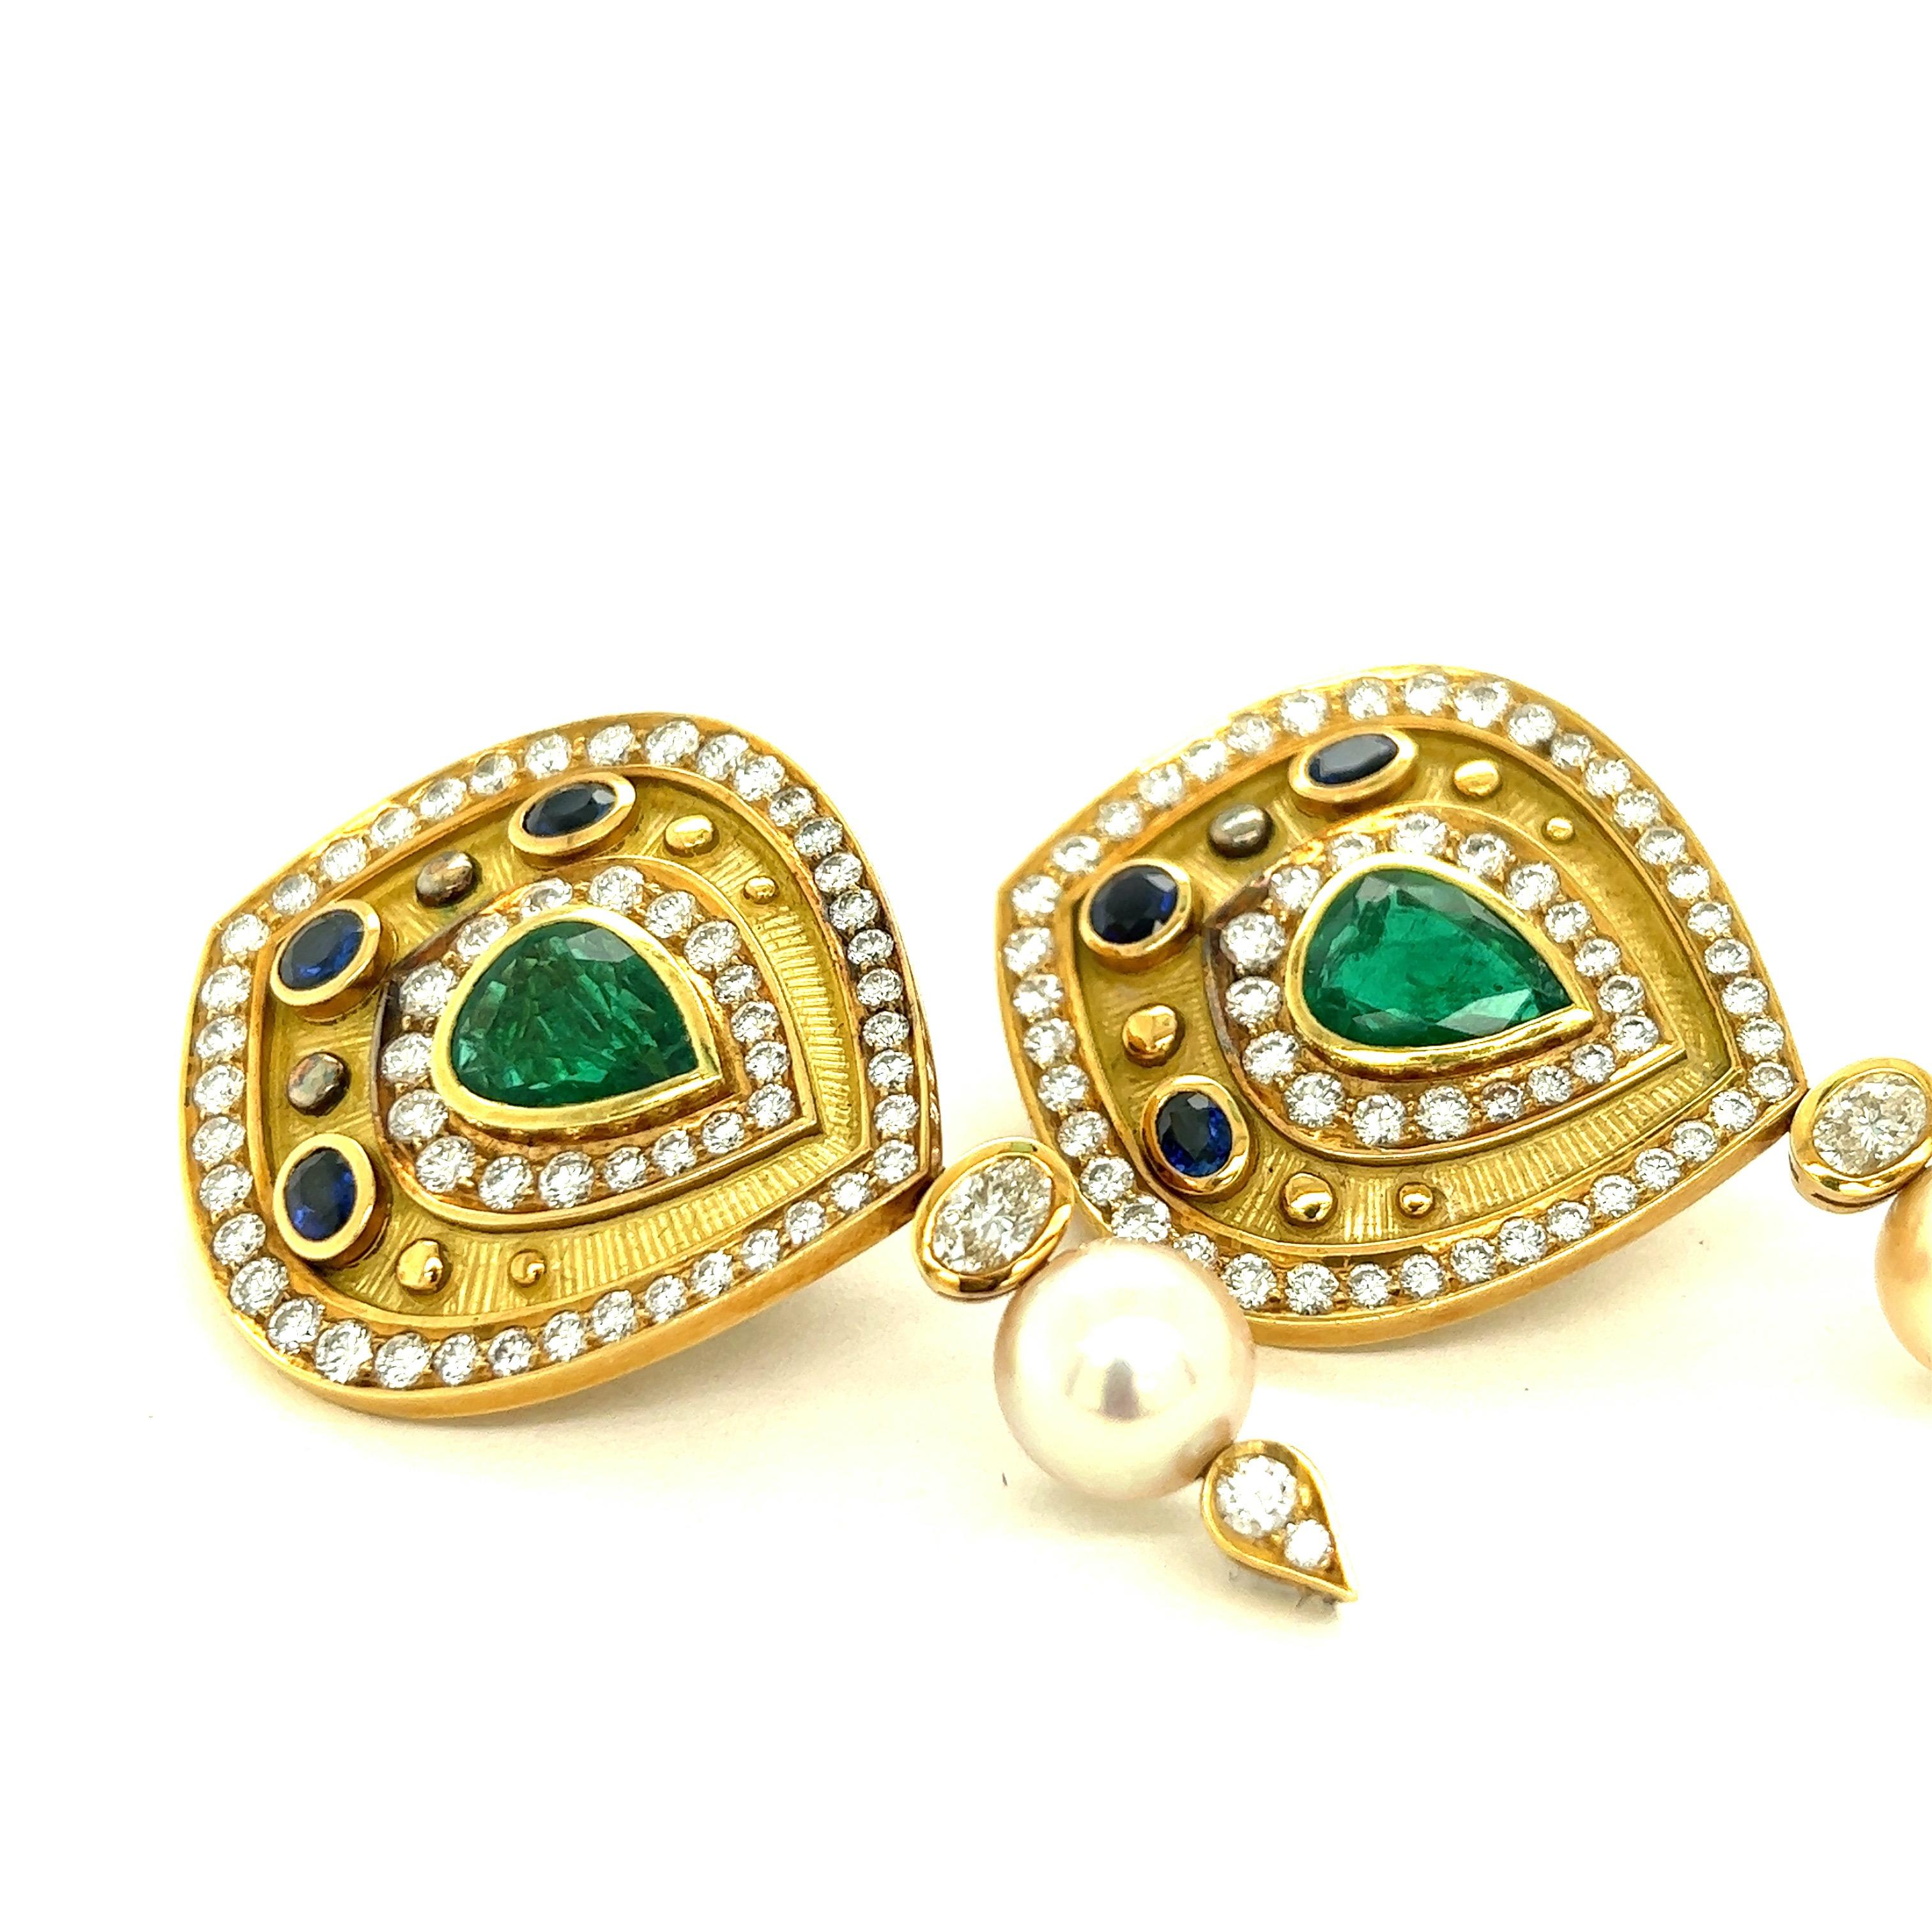 Pear Shaped Emerald, Diamond, and Sapphire 18k Yellow Gold Earrings

Bezel-set pear-shaped emeralds of approximately 7.5 carats total; round, brilliant-cut and oval diamonds of approximately 12 carats total; round and oval cut sapphires of